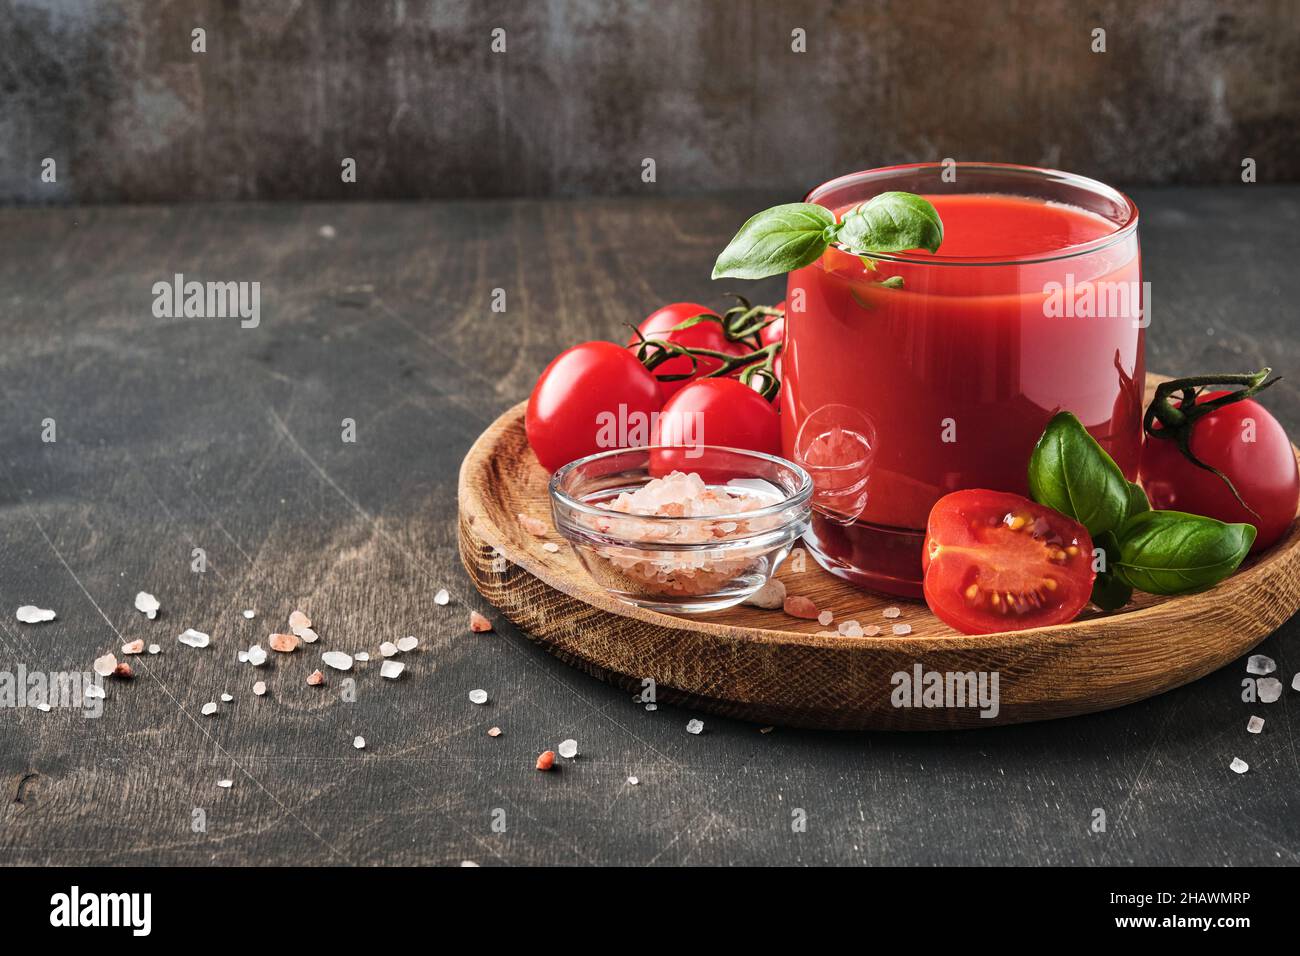 Glass of fresh tomato juice, salt, basil and tomatoes on  wooden stand  on old wooden background. With copy space. Stock Photo